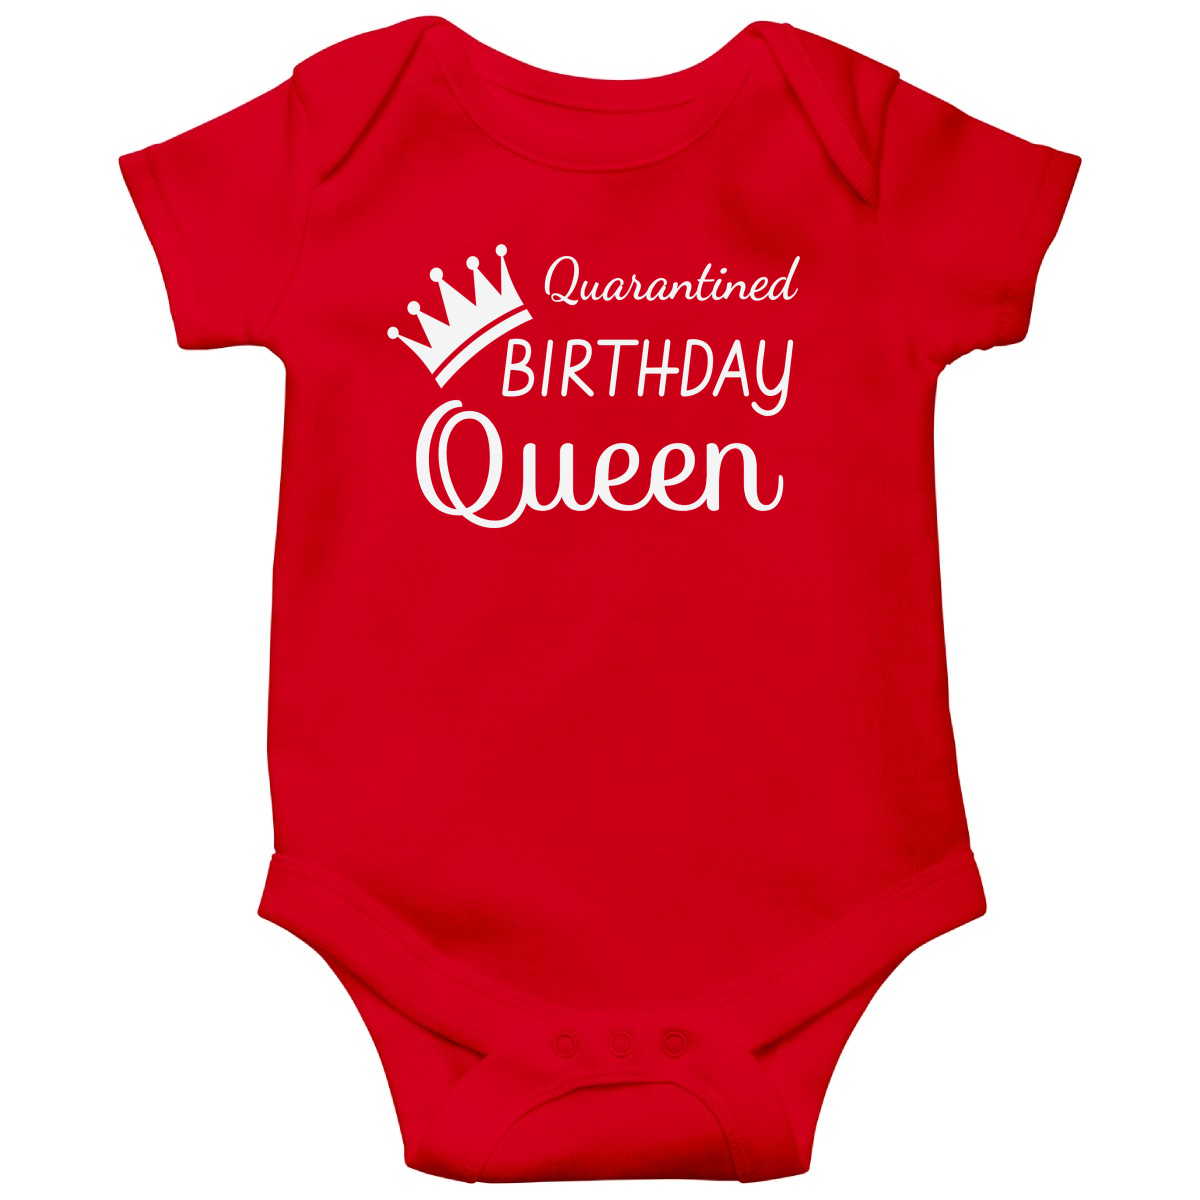 Quarantined Birthday Queen Baby Bodysuits | Red